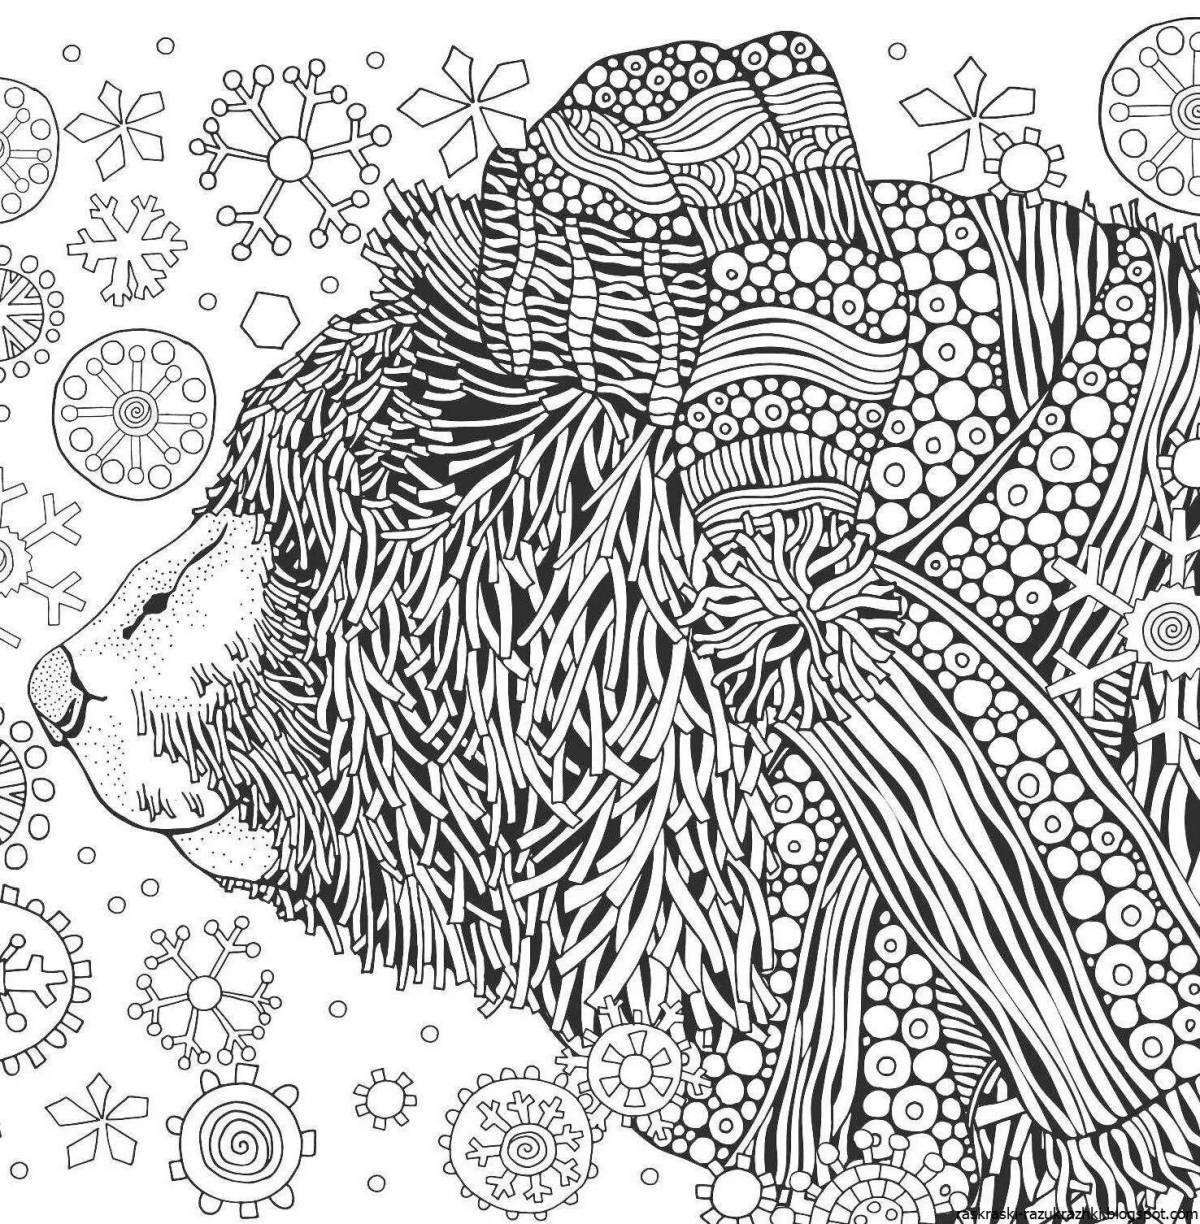 Exquisite hygge coloring book